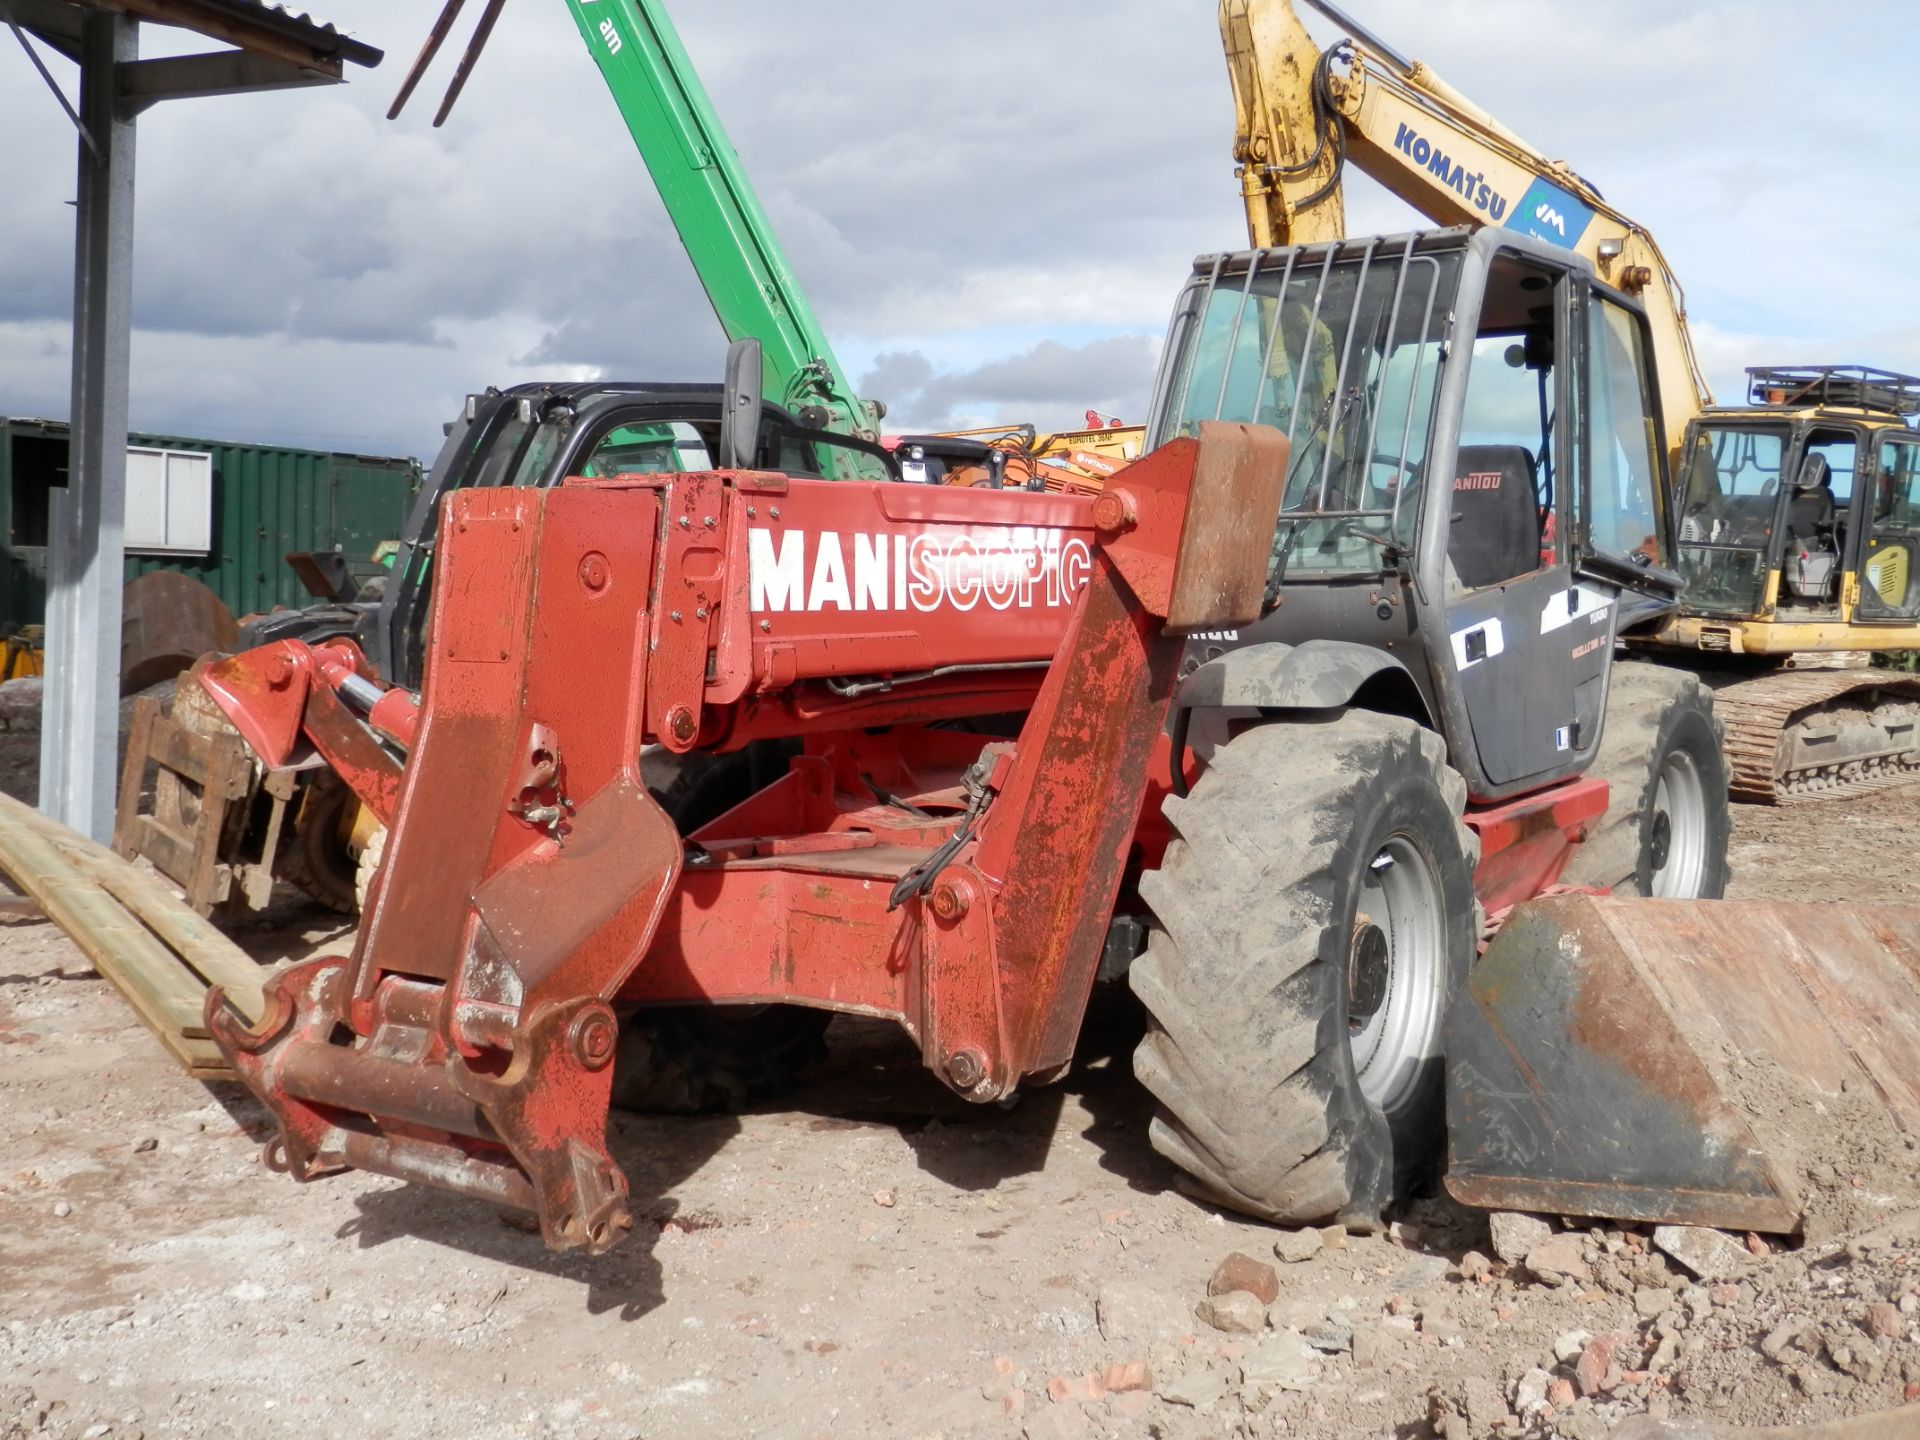 2003 MANITOU MANISCOPIC TELE LIFT WITH FORKS,3.5 TONNE LIFT CAPACITY. - Image 6 of 10